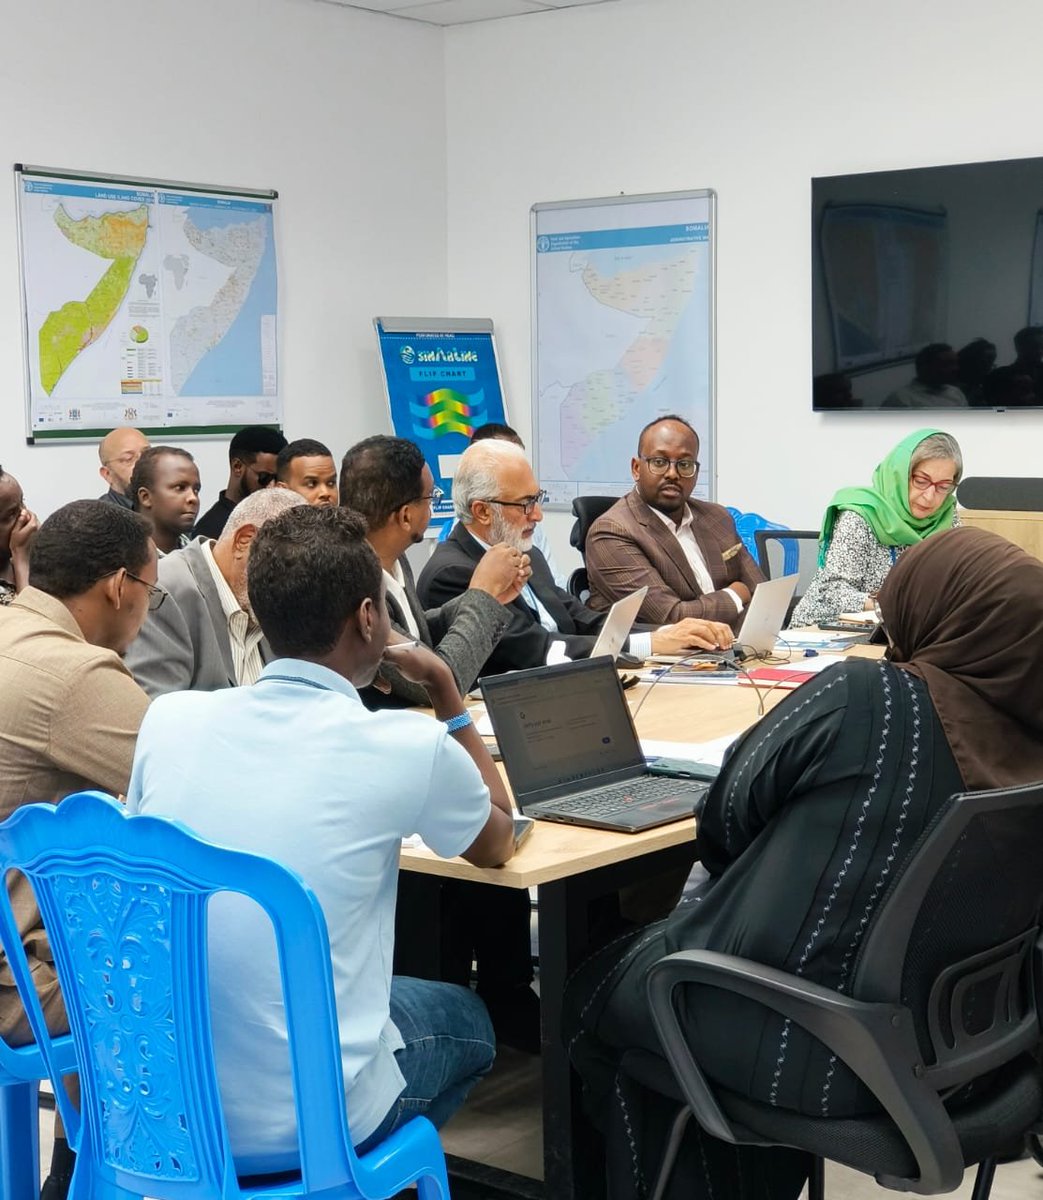 @FAOSomalia, in partnership with the @MoECC_Somalia, conducted a national stakeholder consultation workshop on the design of a @theGCF project on #climate resilient agriculture in #Somalia. Stakeholders contributed valuable insights for the upcoming project proposal.